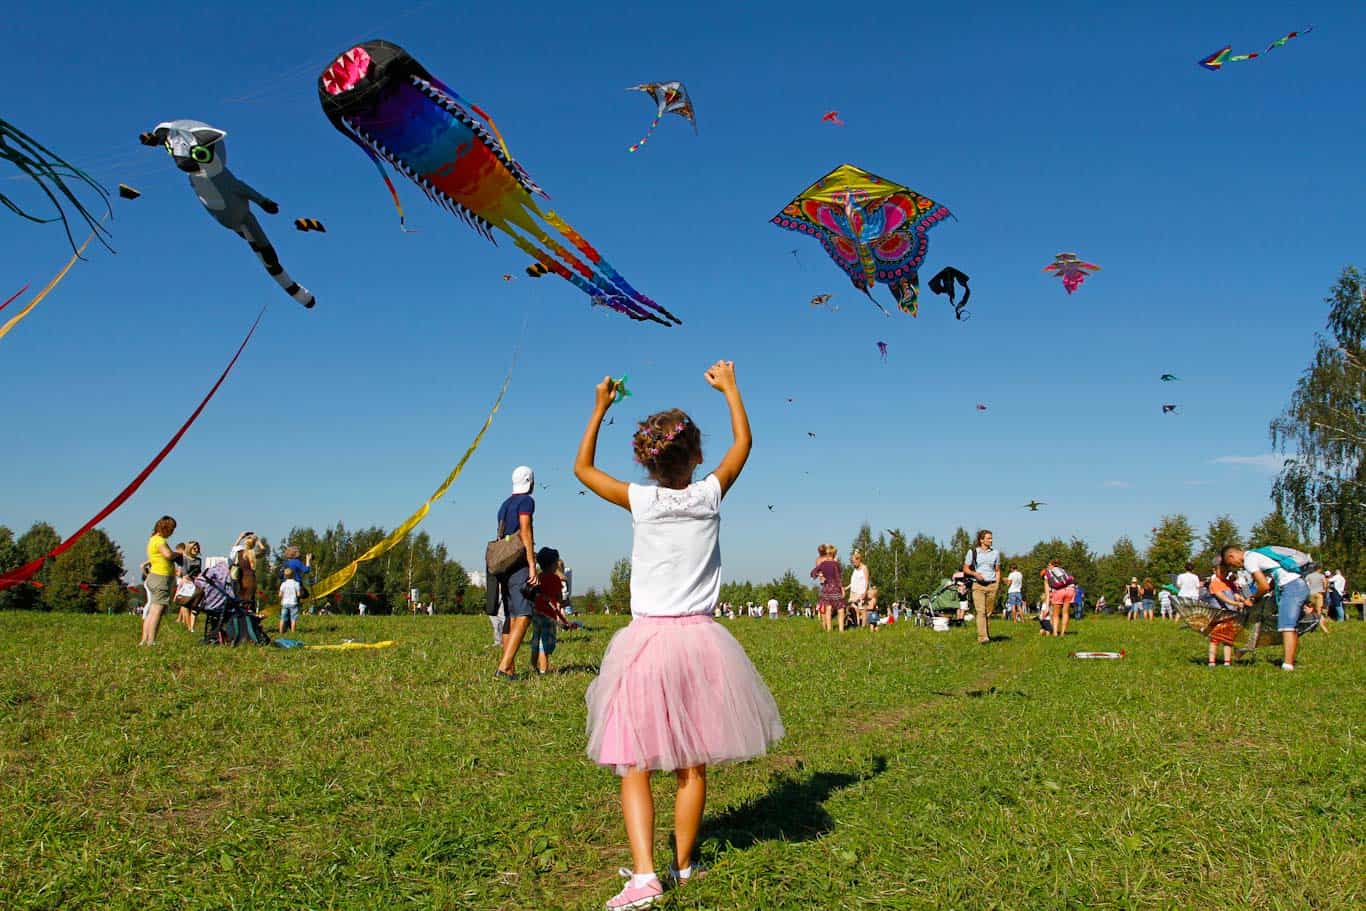 Girl in pink dress flying a kite with many other kites around